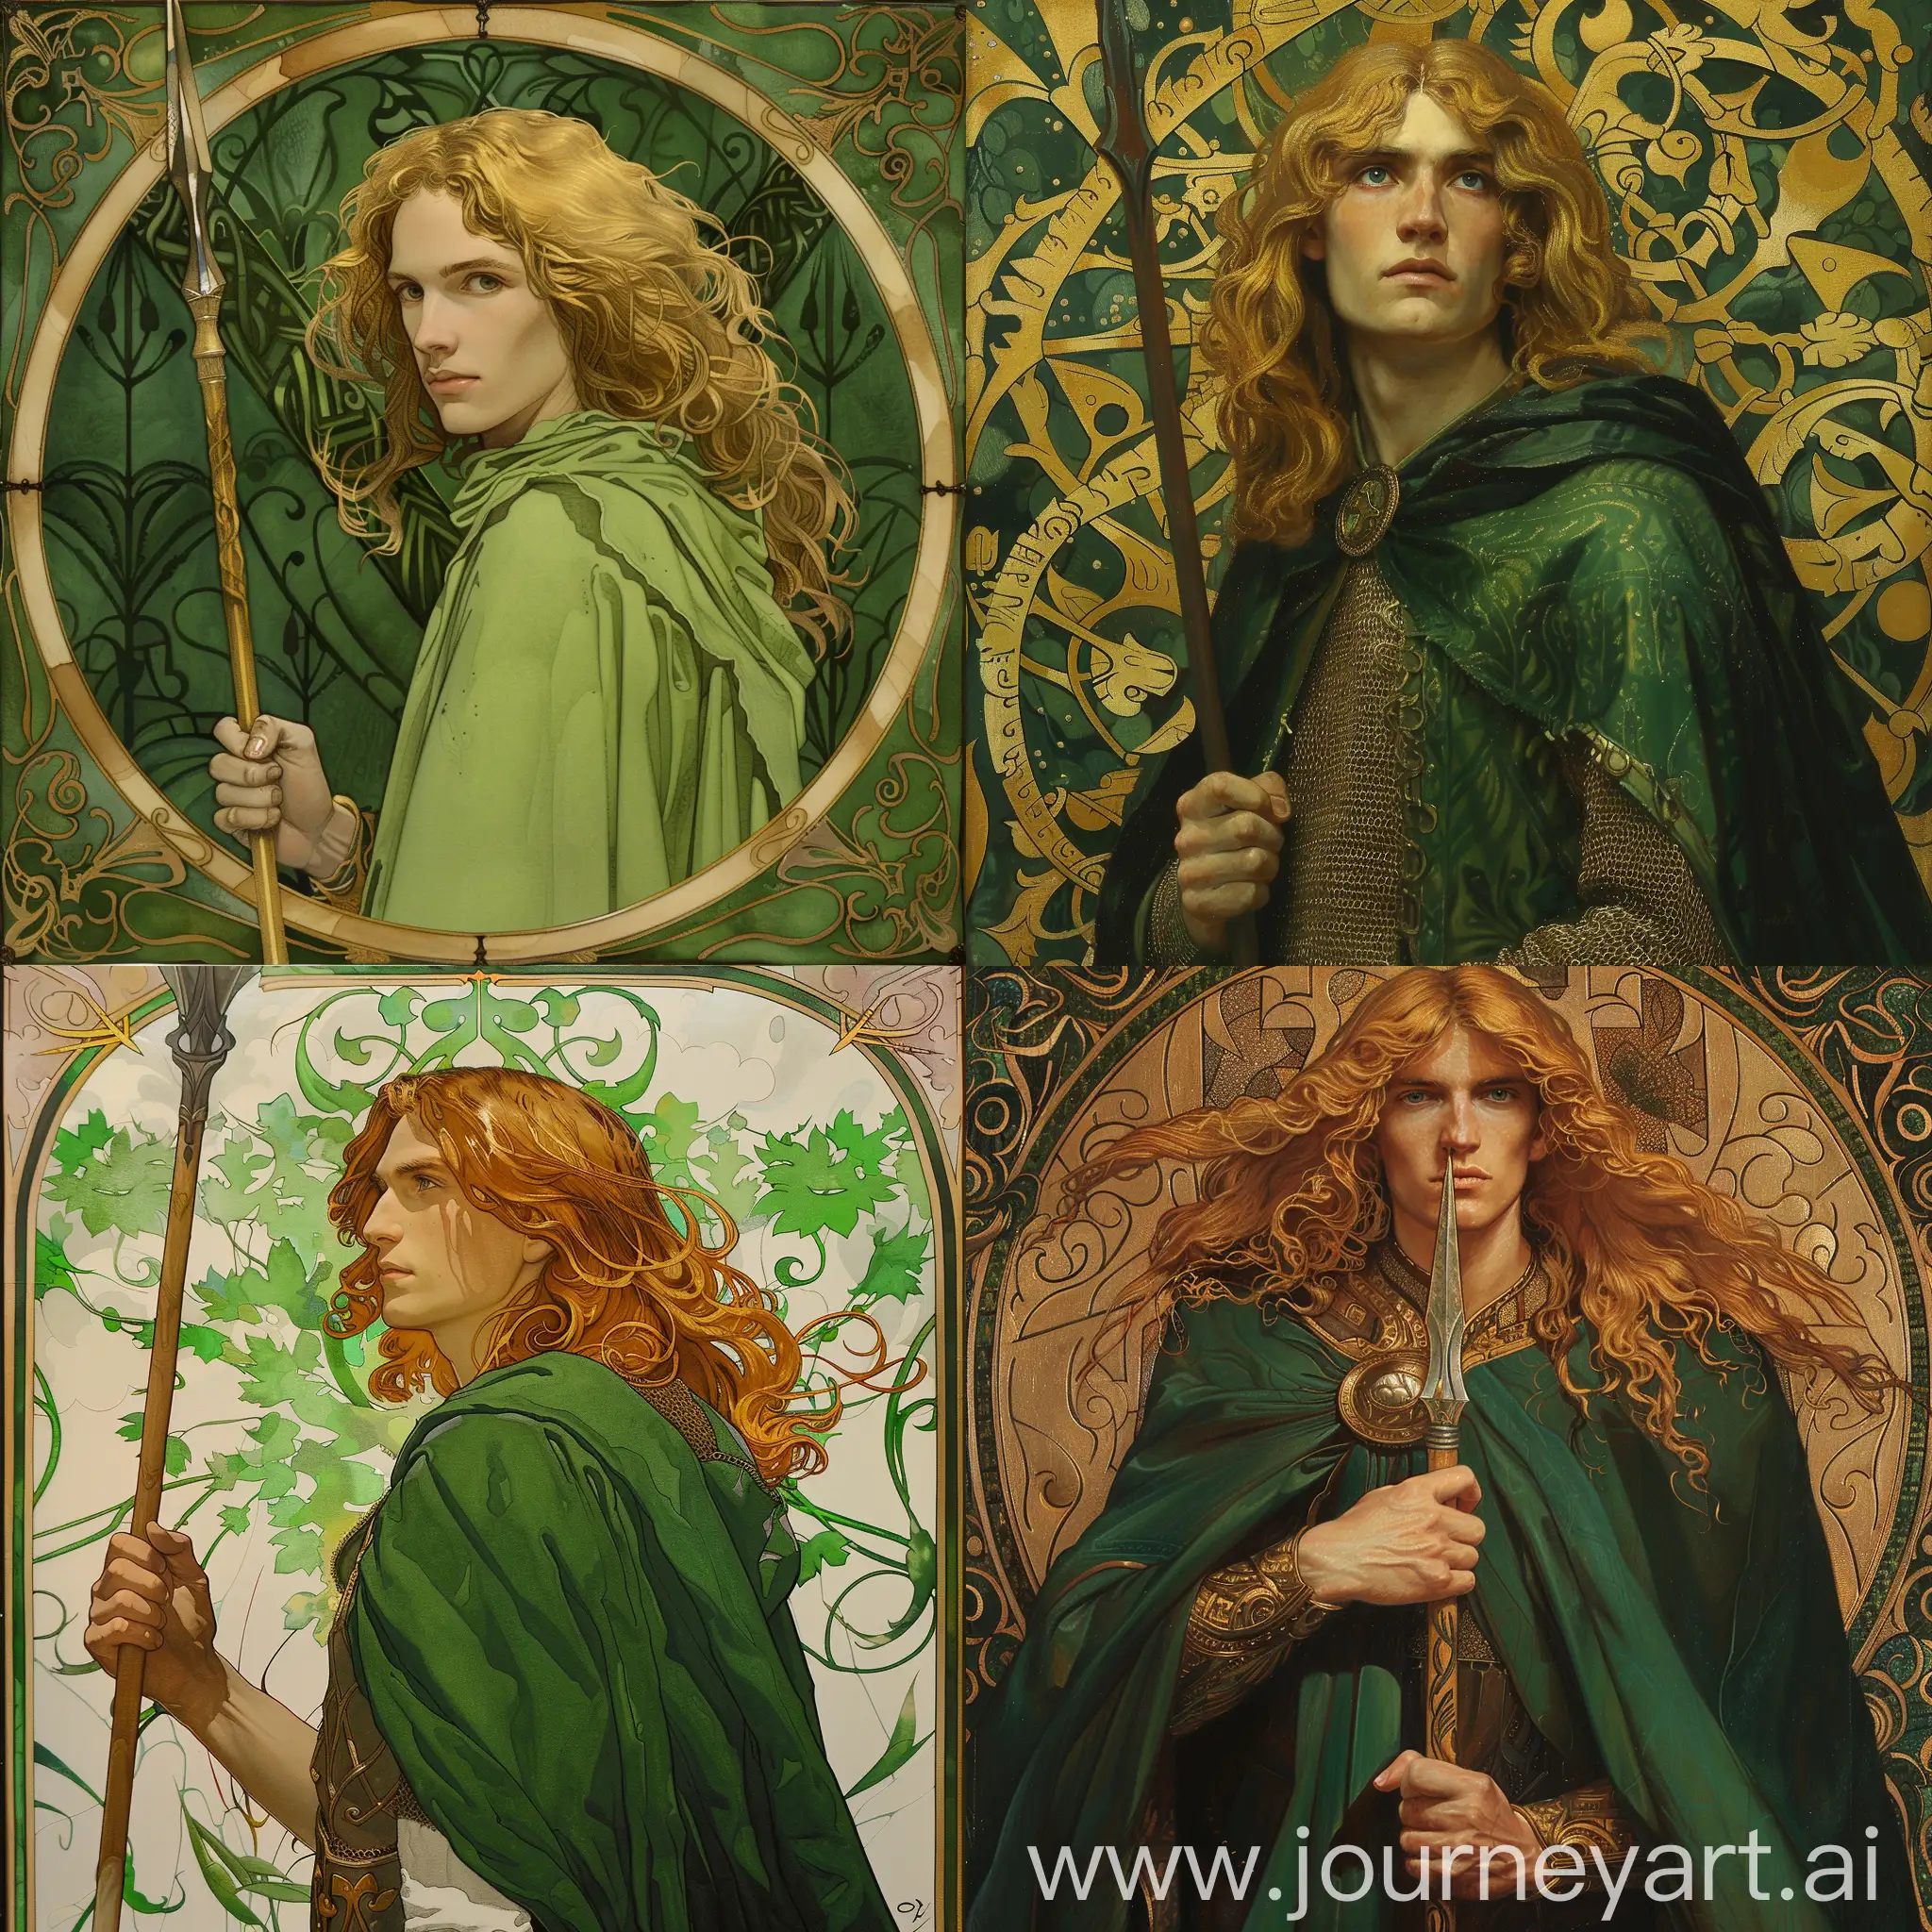 Young man with long golden hair, in the green mantle, with spear, art nouveau